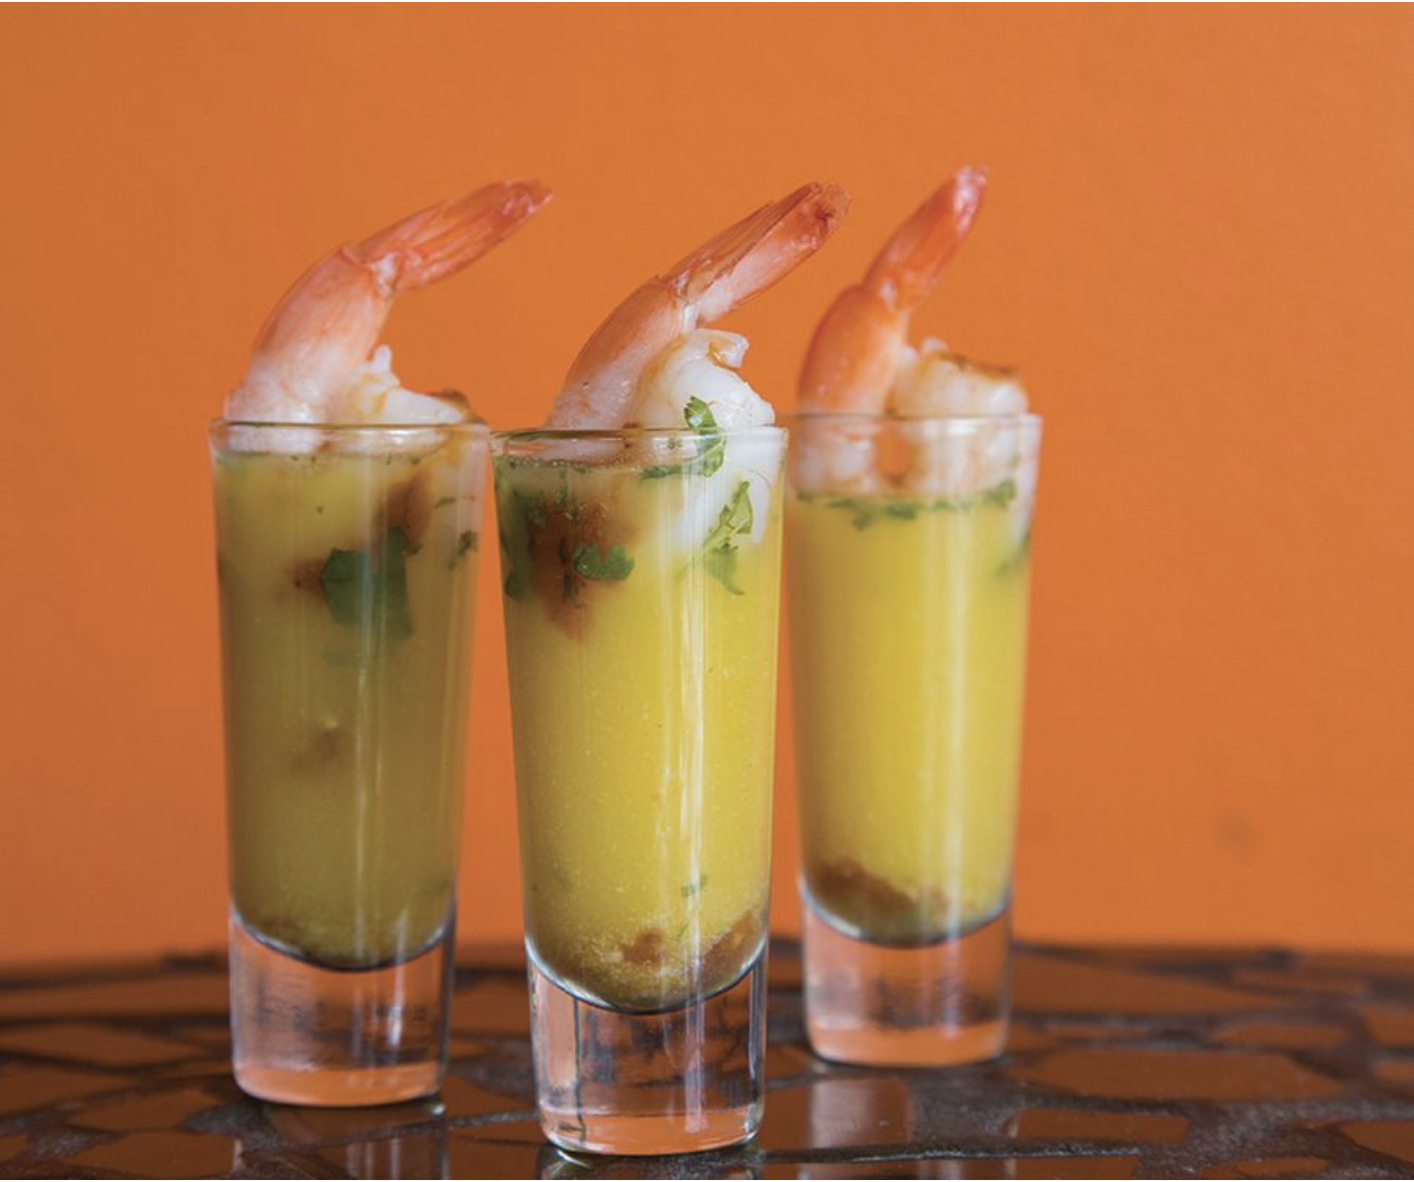 Colorful shrimp appetizer with ceviche juice and hot chili sauce in a shot glass from a Peruvian restaurant